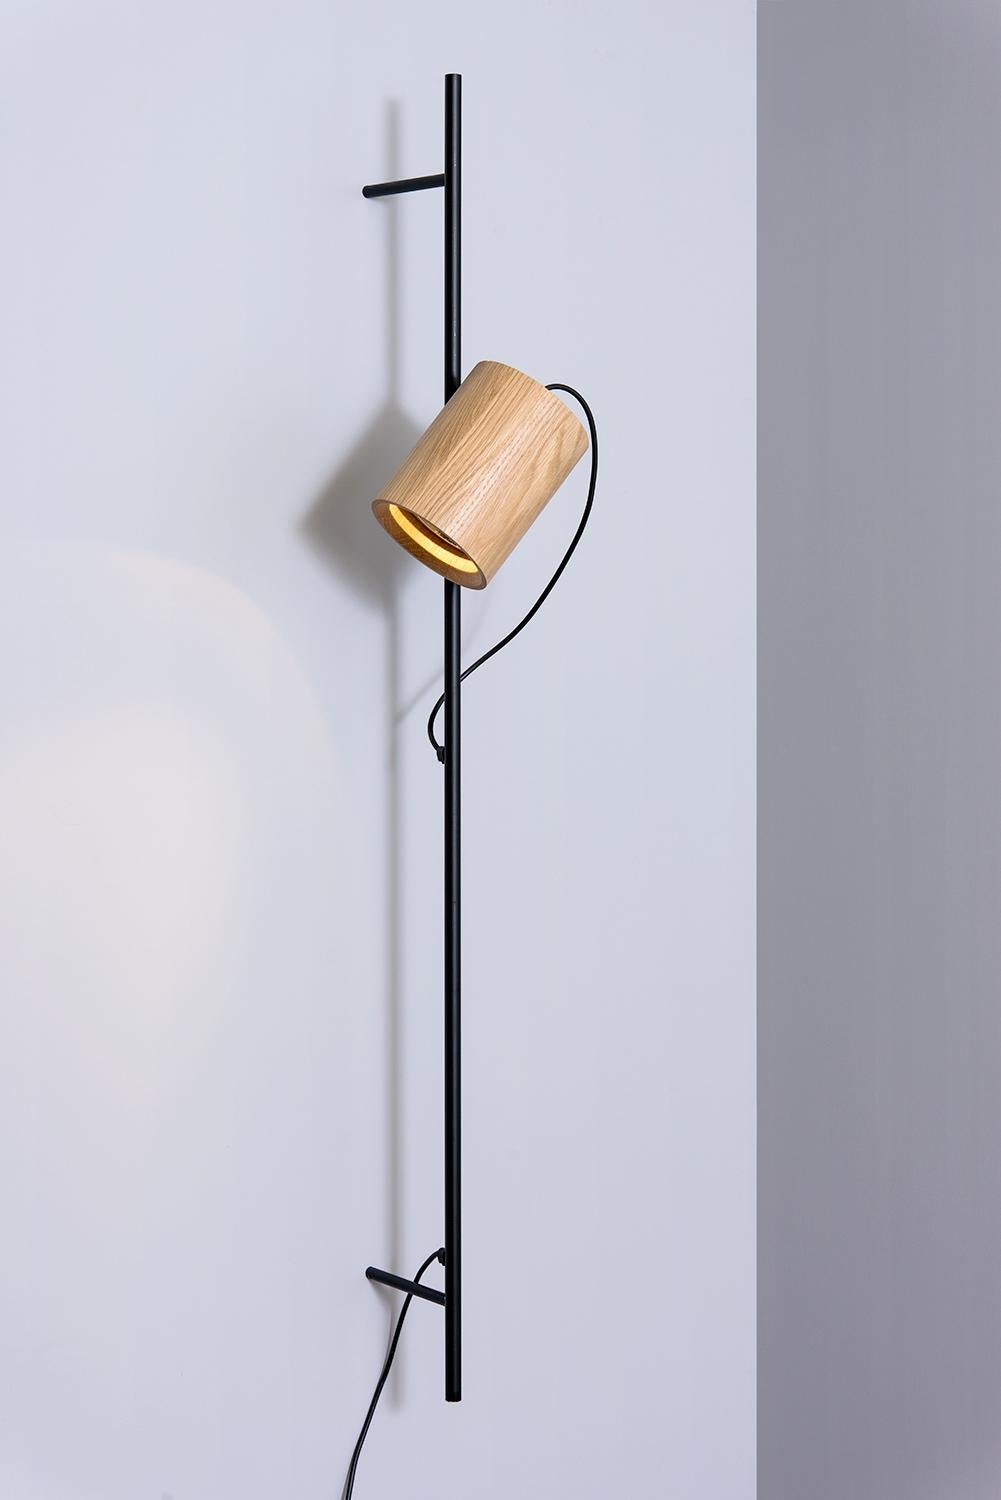 Spot on line wall lamp by ASAF Weinbroom Studio
Dimensions: 130 x 24.5 x 13 cm
Materials: Oak


15w Max Led / E27
Only LED light

All our lamps can be wired according to each country. If sold to the USA it will be wired for the USA for